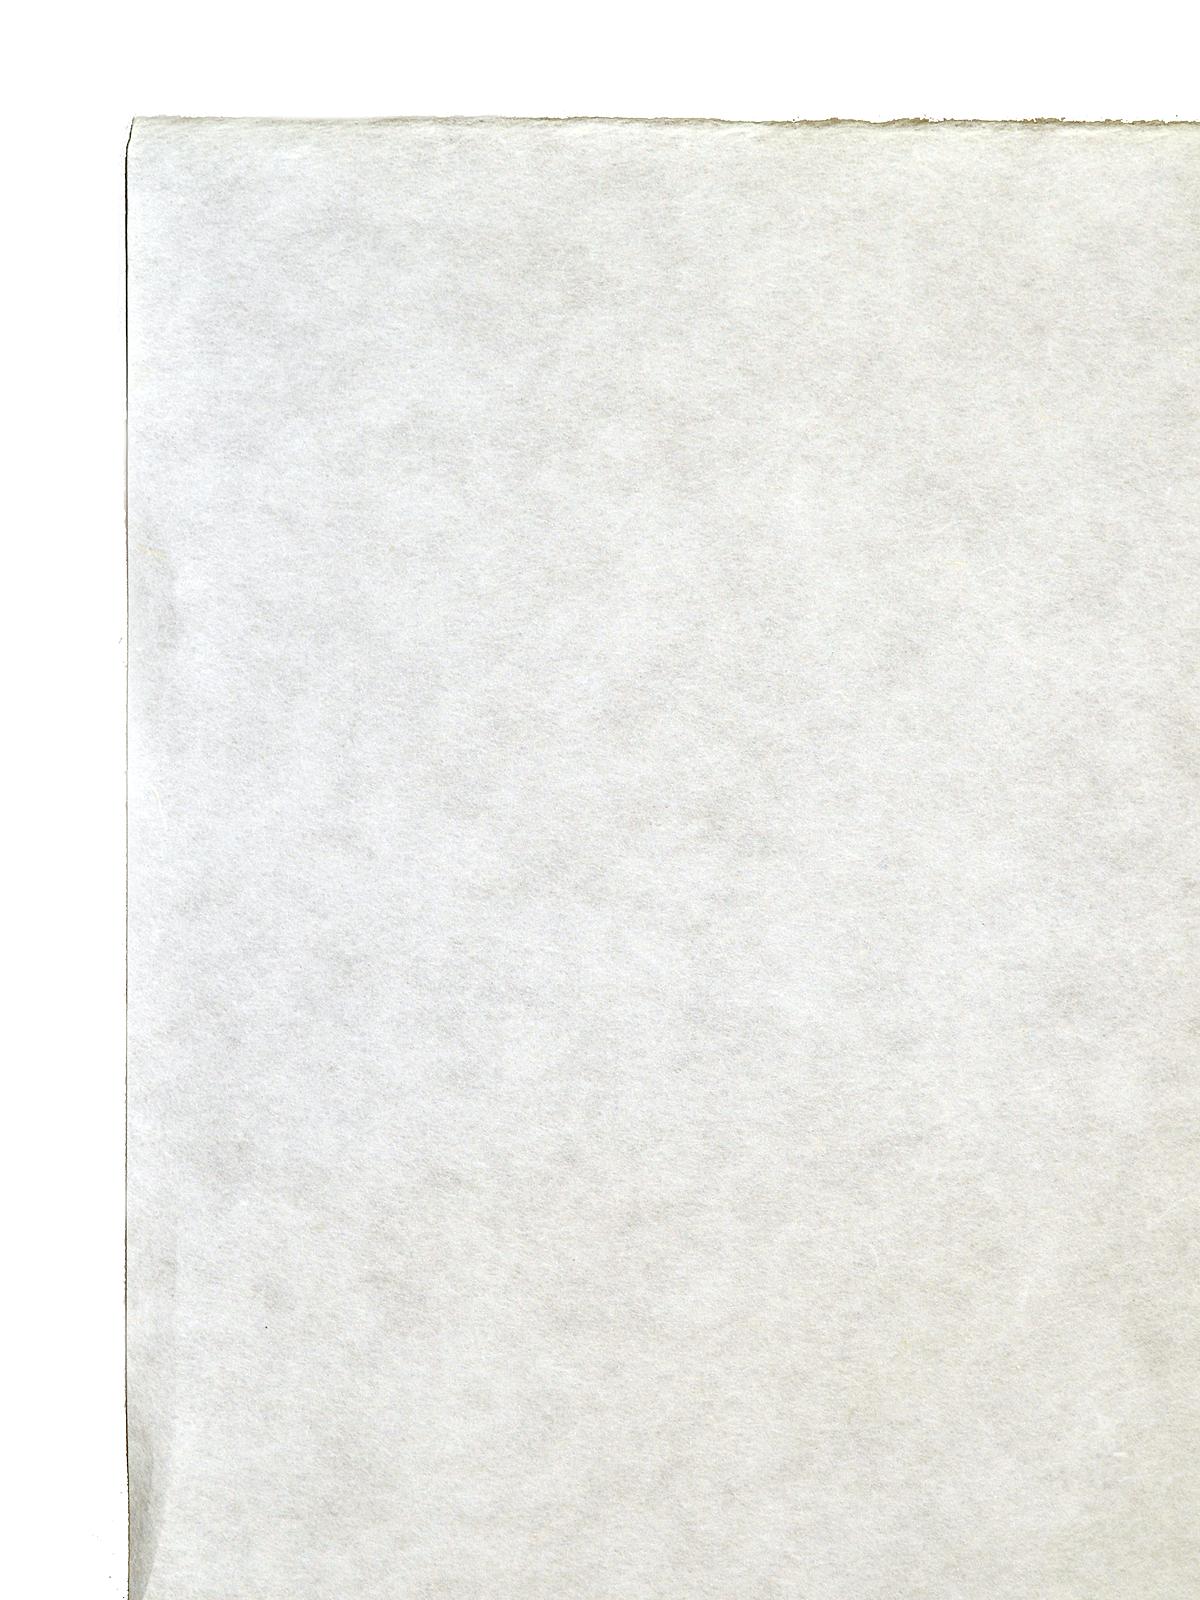 Thai Mulberry Paper Bleached 45 G M2 25 In. X 37 In.